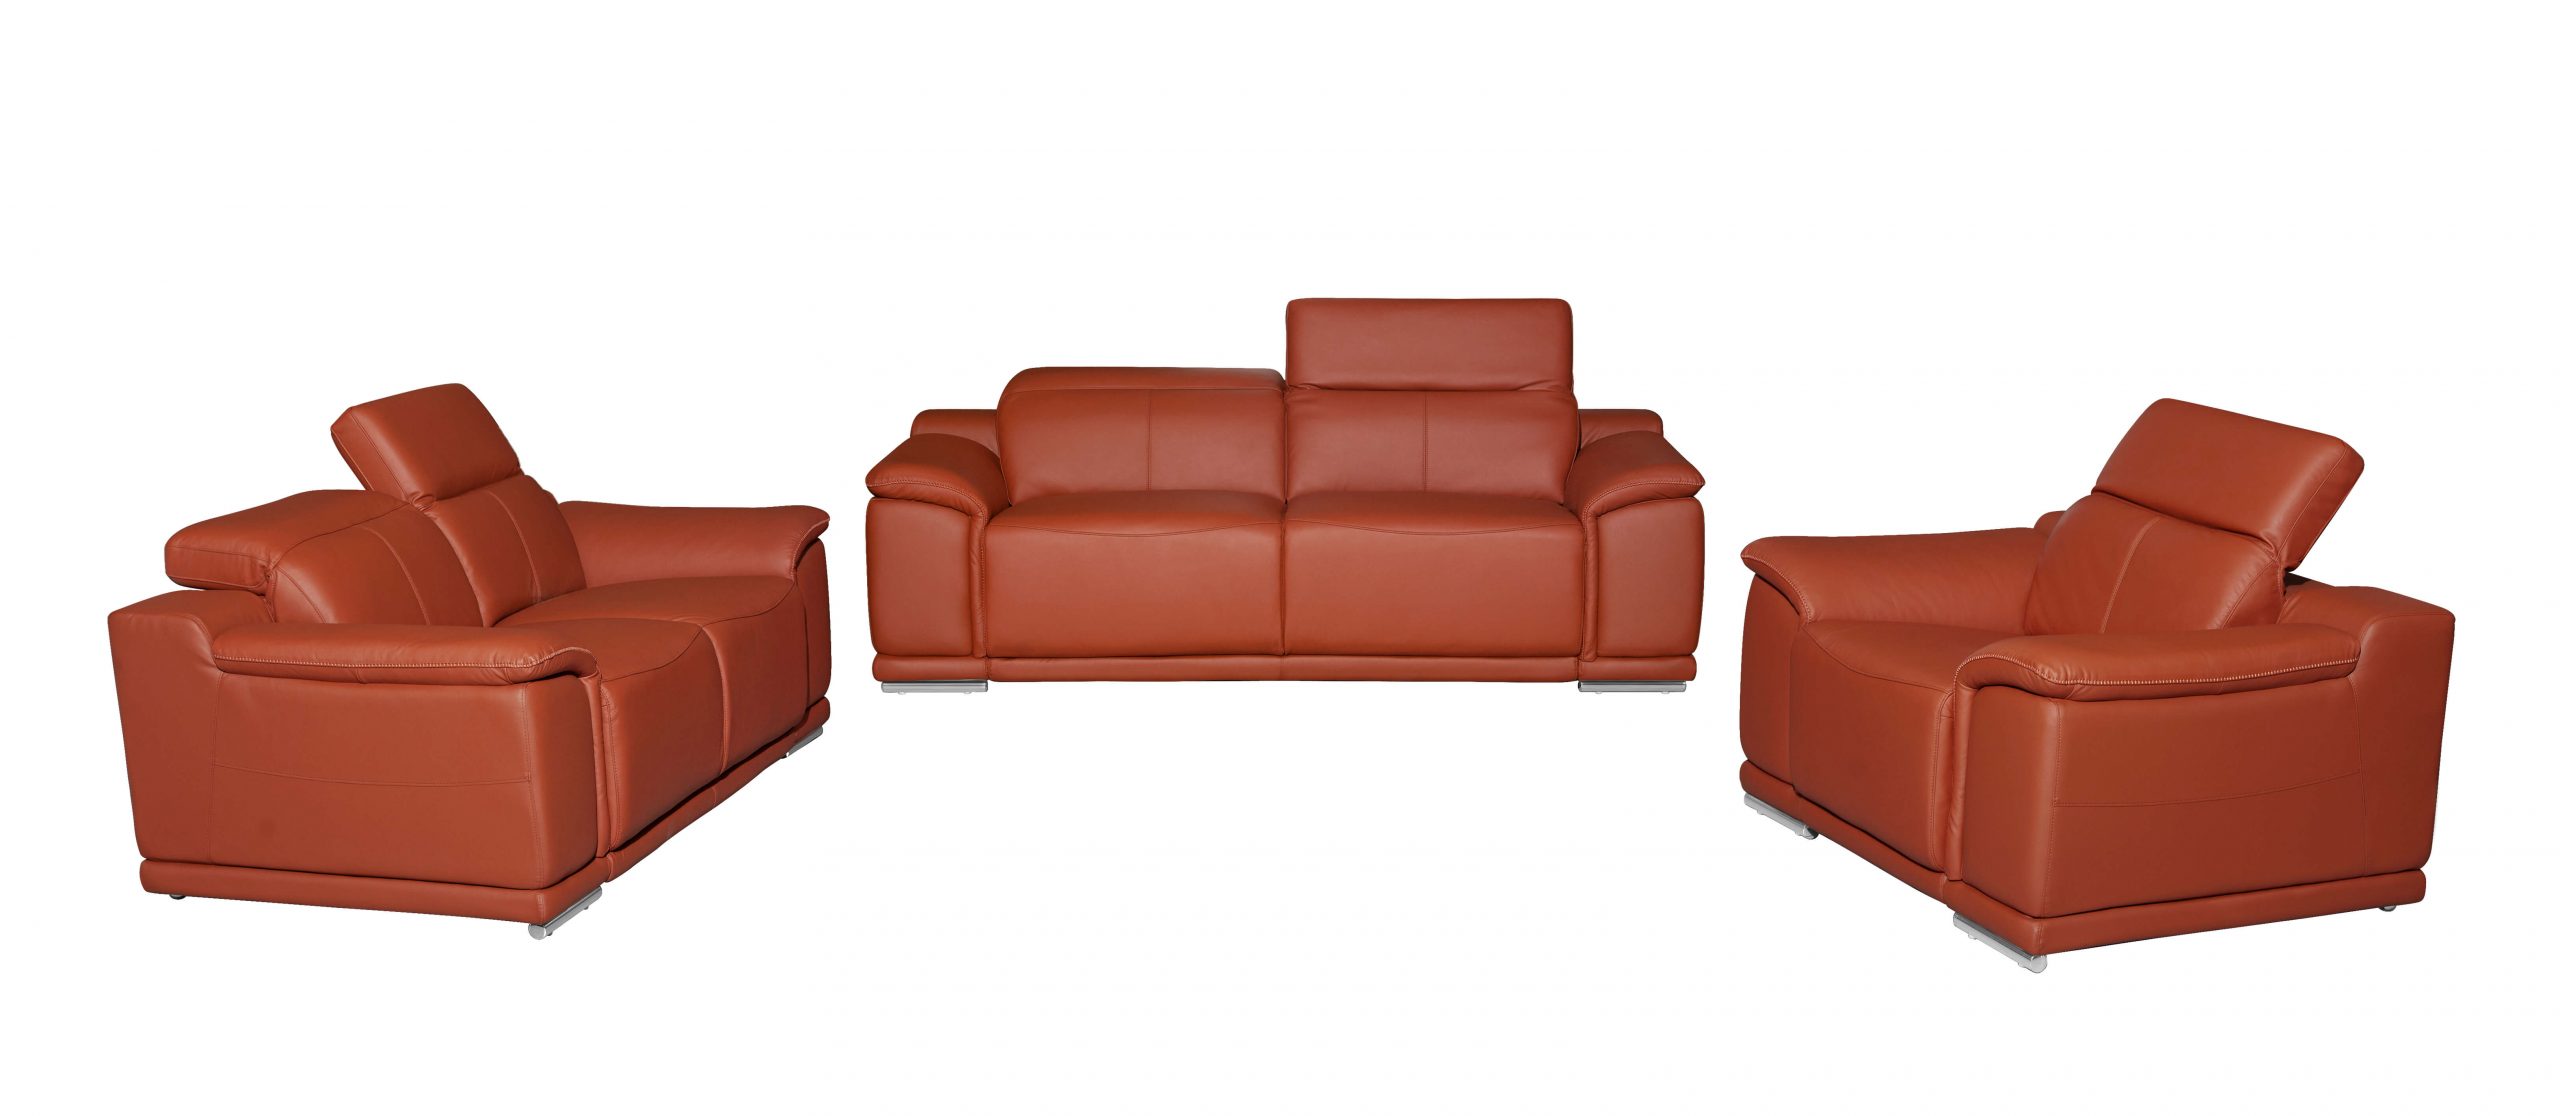 Mars lounge suite - United Furniture Outlets